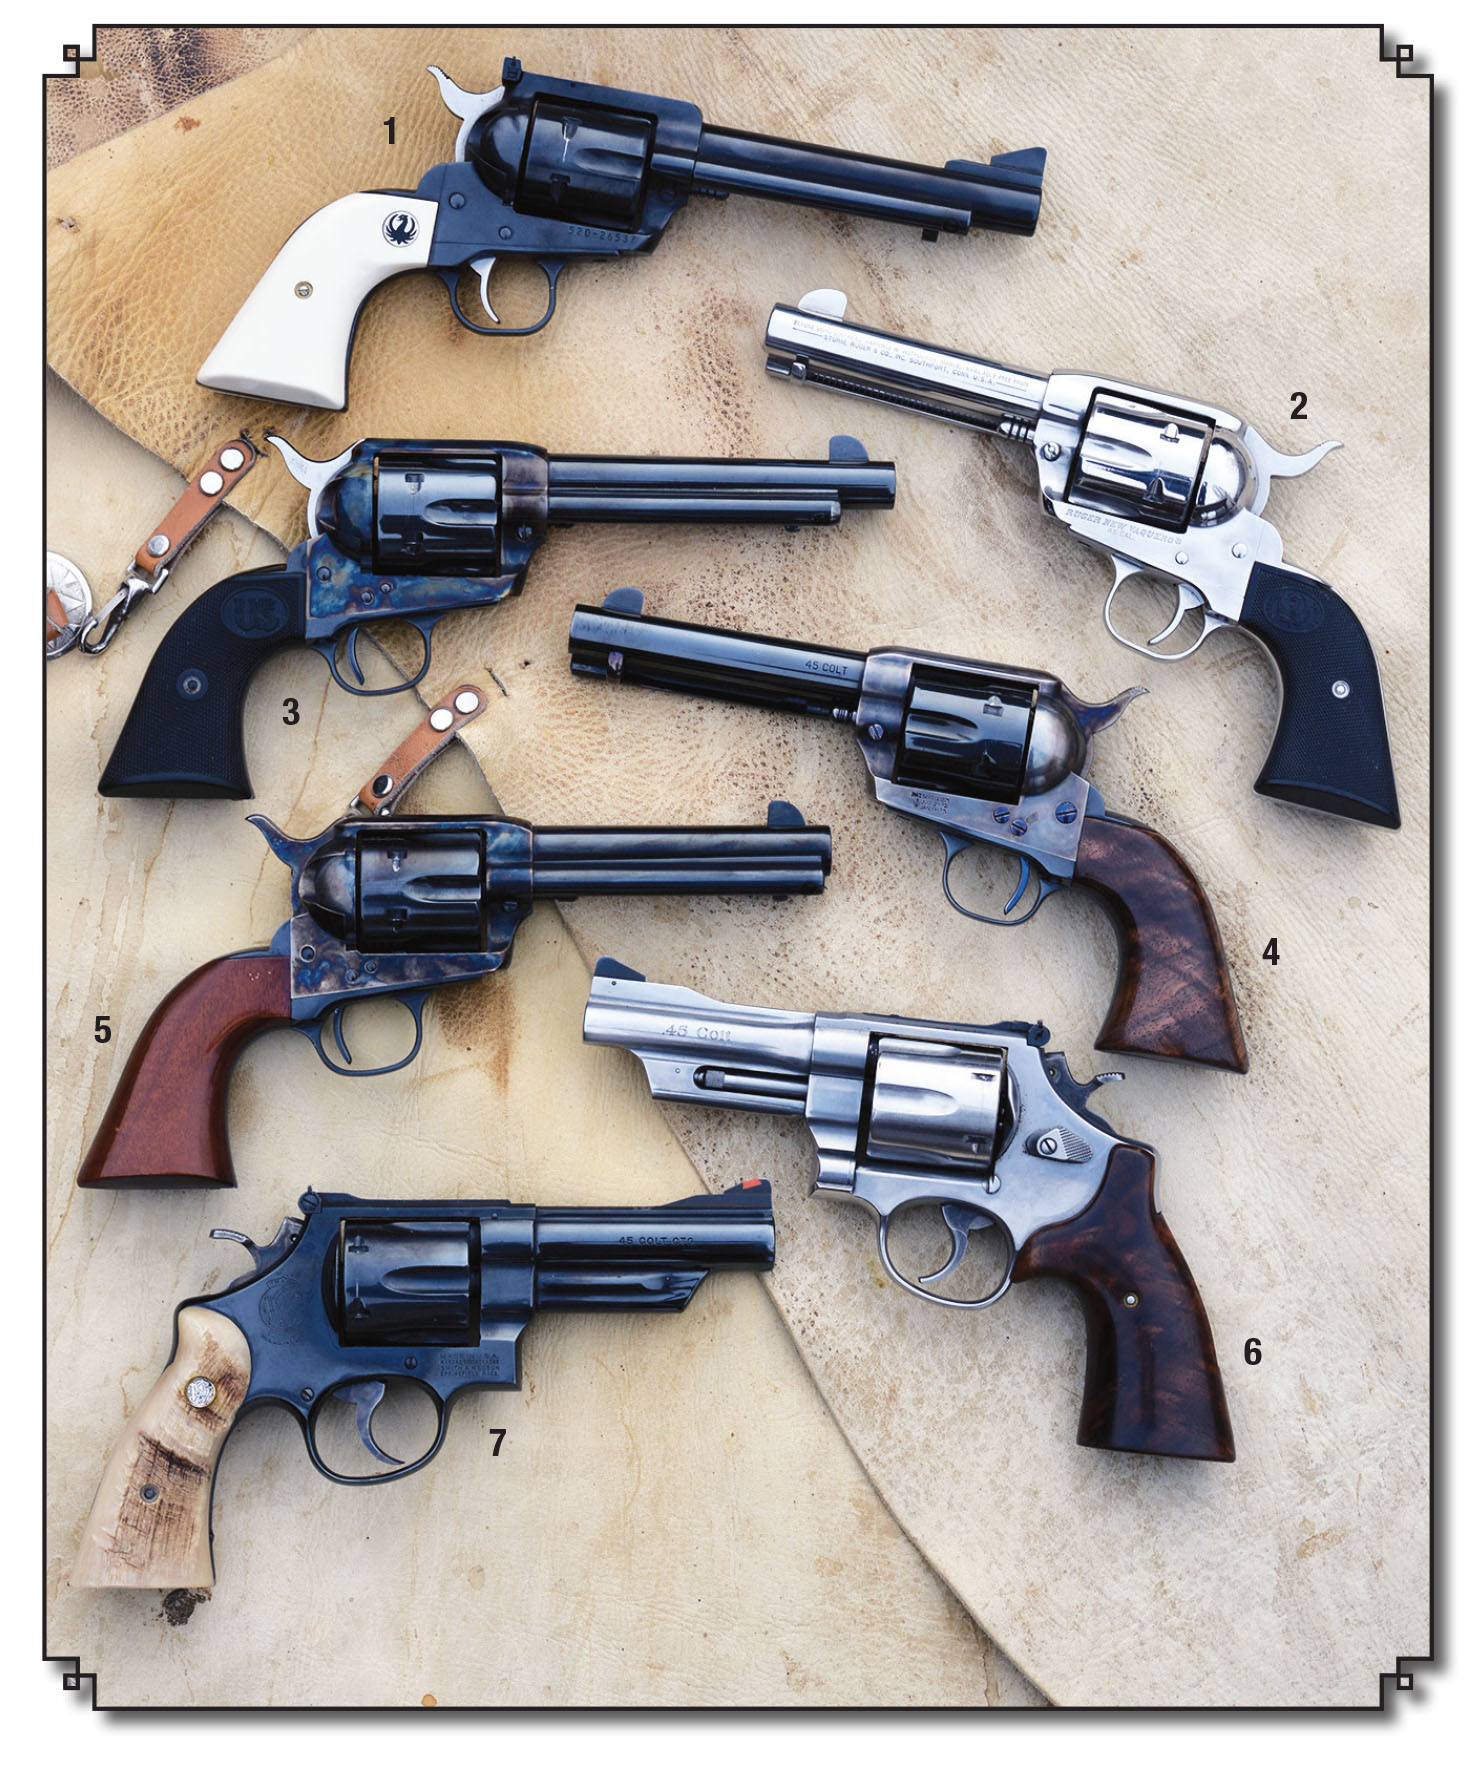 Many guns are suitable for .45 Colt +P pressures that reach 23,000 psi including: (1) Ruger New Model Blackhawk .45 Colt flattop, (2) Ruger New Vaquero, (3) USFA Pre-War, (4) Standard Manufacturing Single Action, (5) Uberti 1873 SAA, (6) Smith & Wesson Model 625 Mountain Gun and (7) Smith & Wesson Model 25-5.